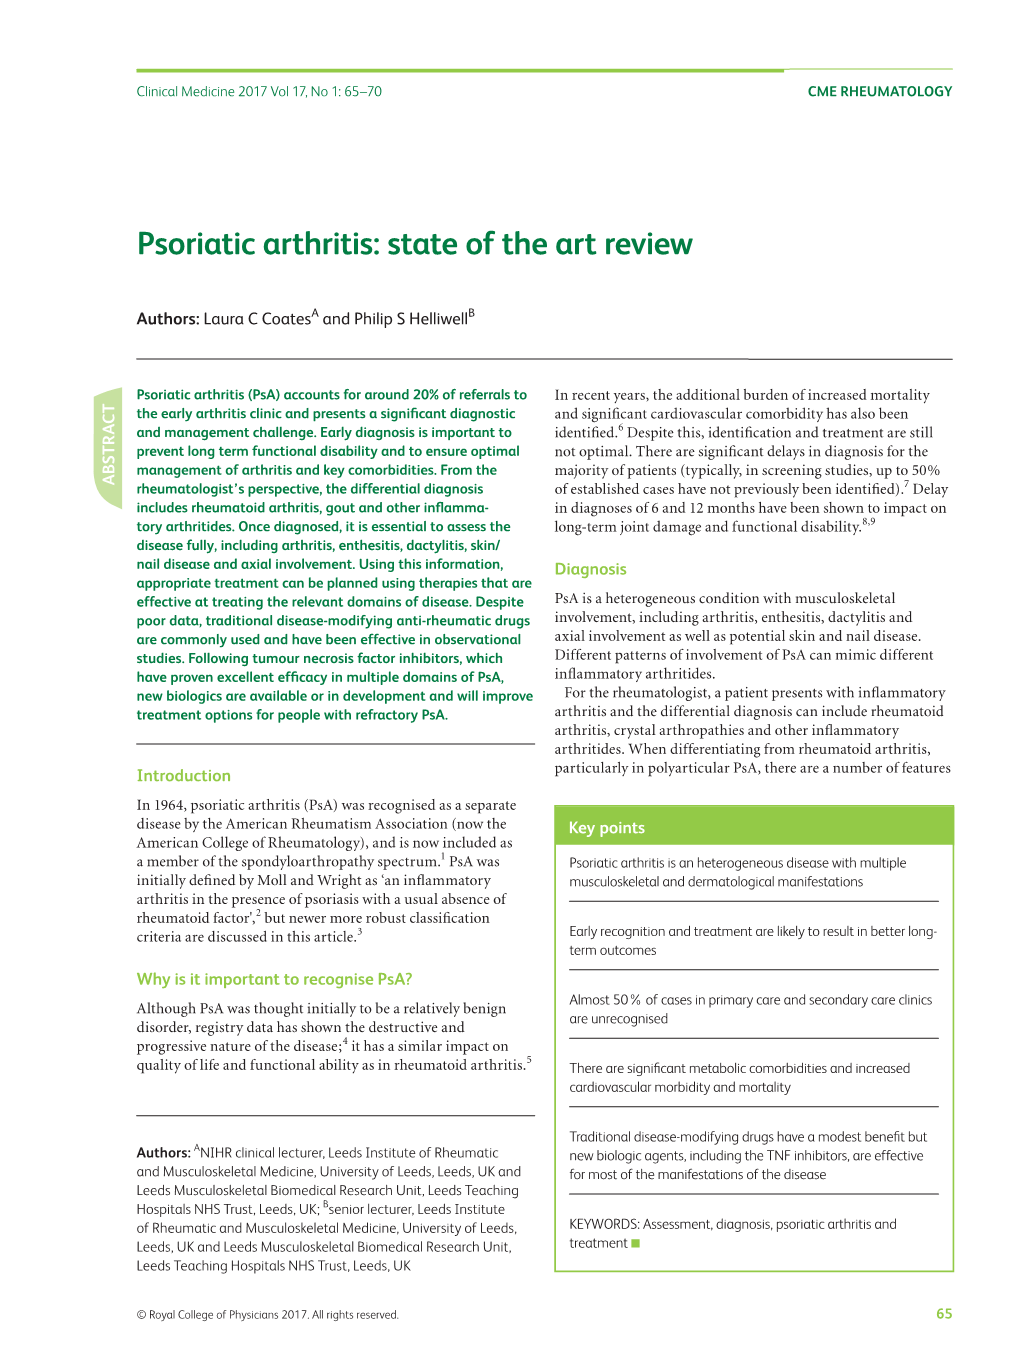 Psoriatic Arthritis: State of the Art Review